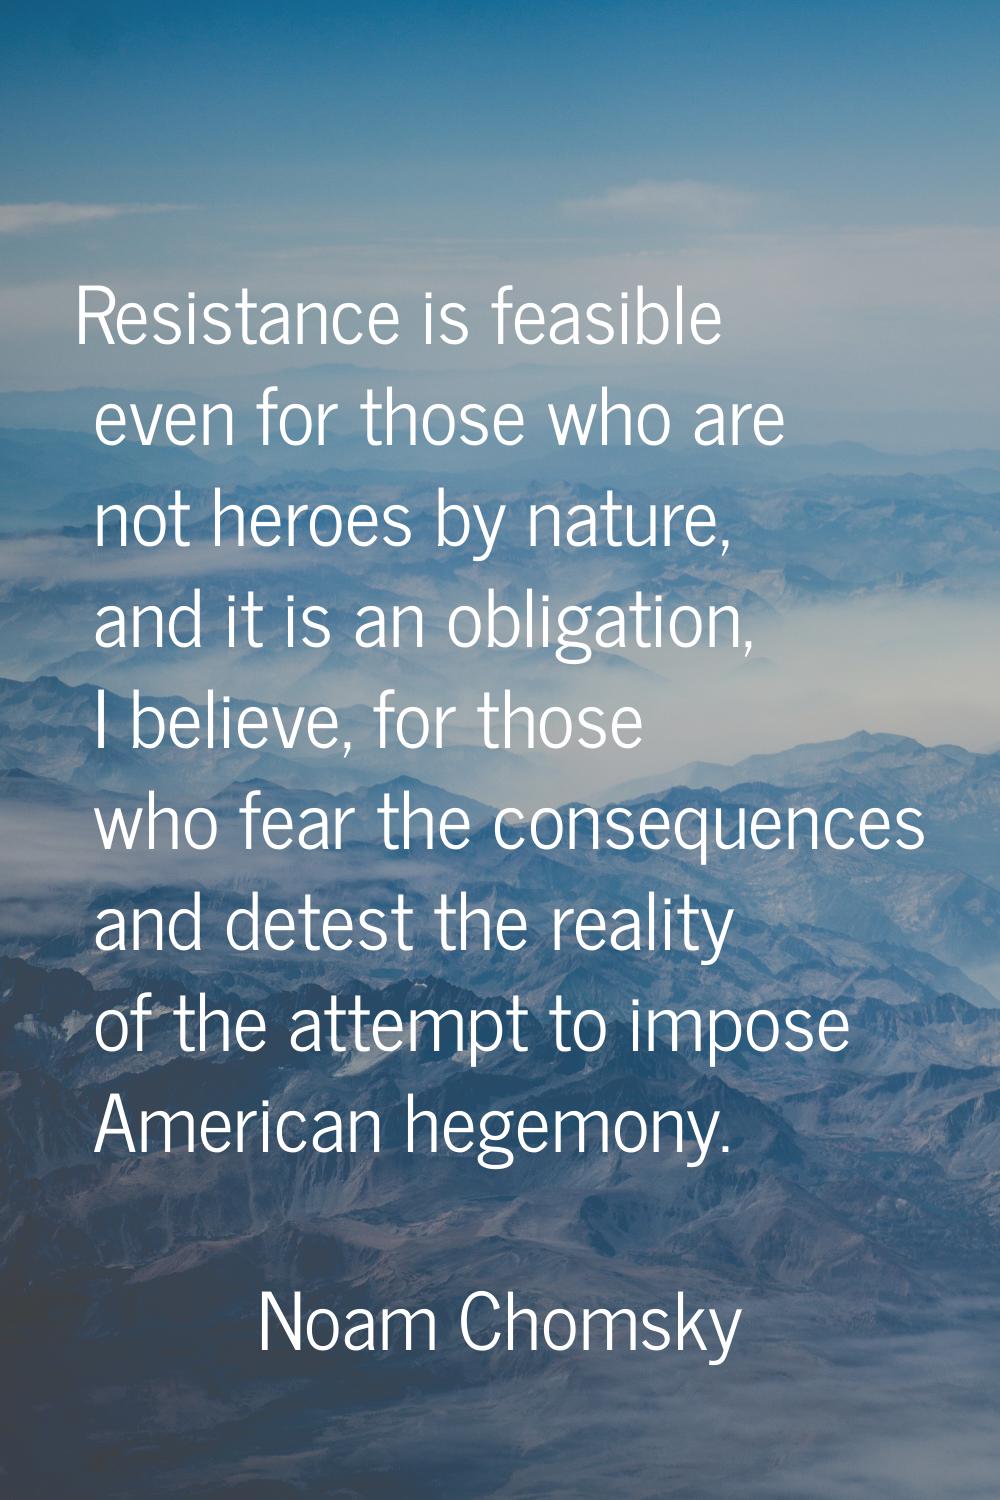 Resistance is feasible even for those who are not heroes by nature, and it is an obligation, I beli